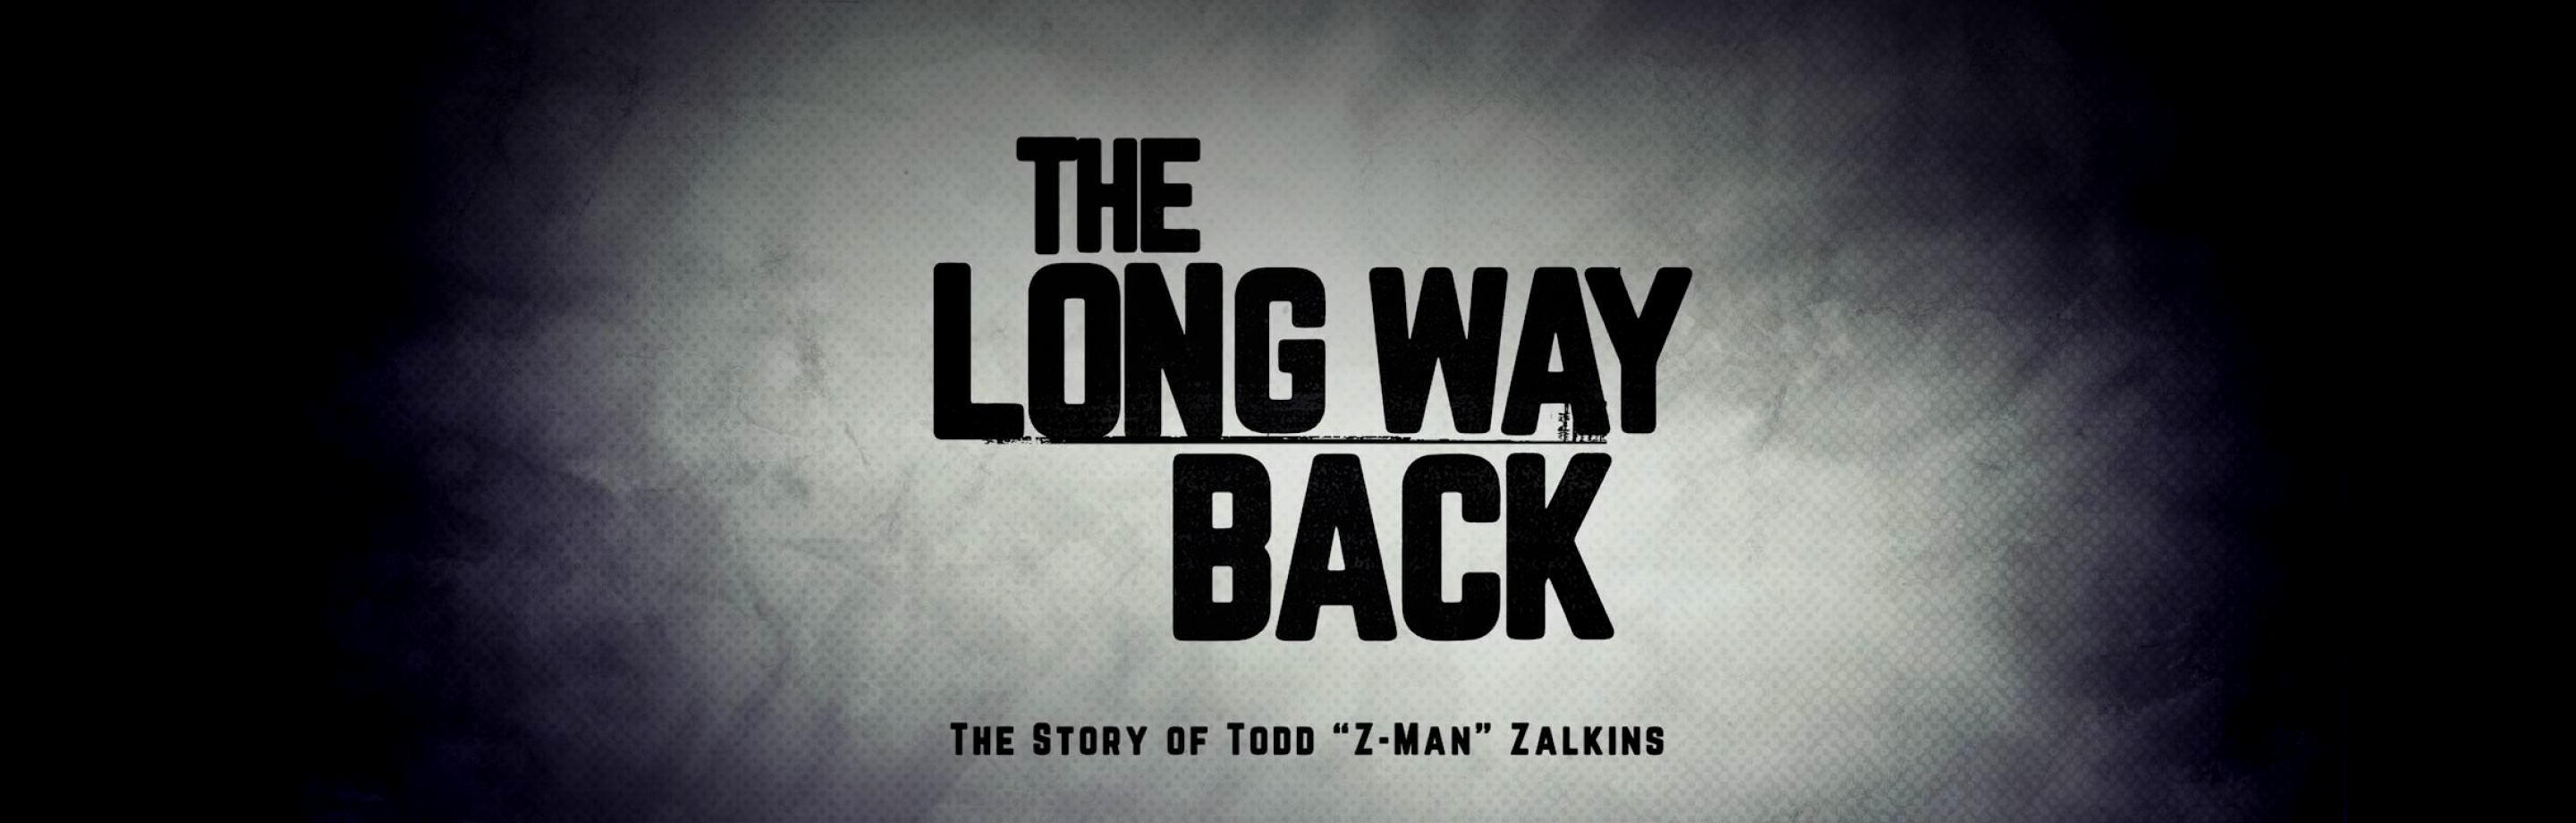 The Long Way Back project cover